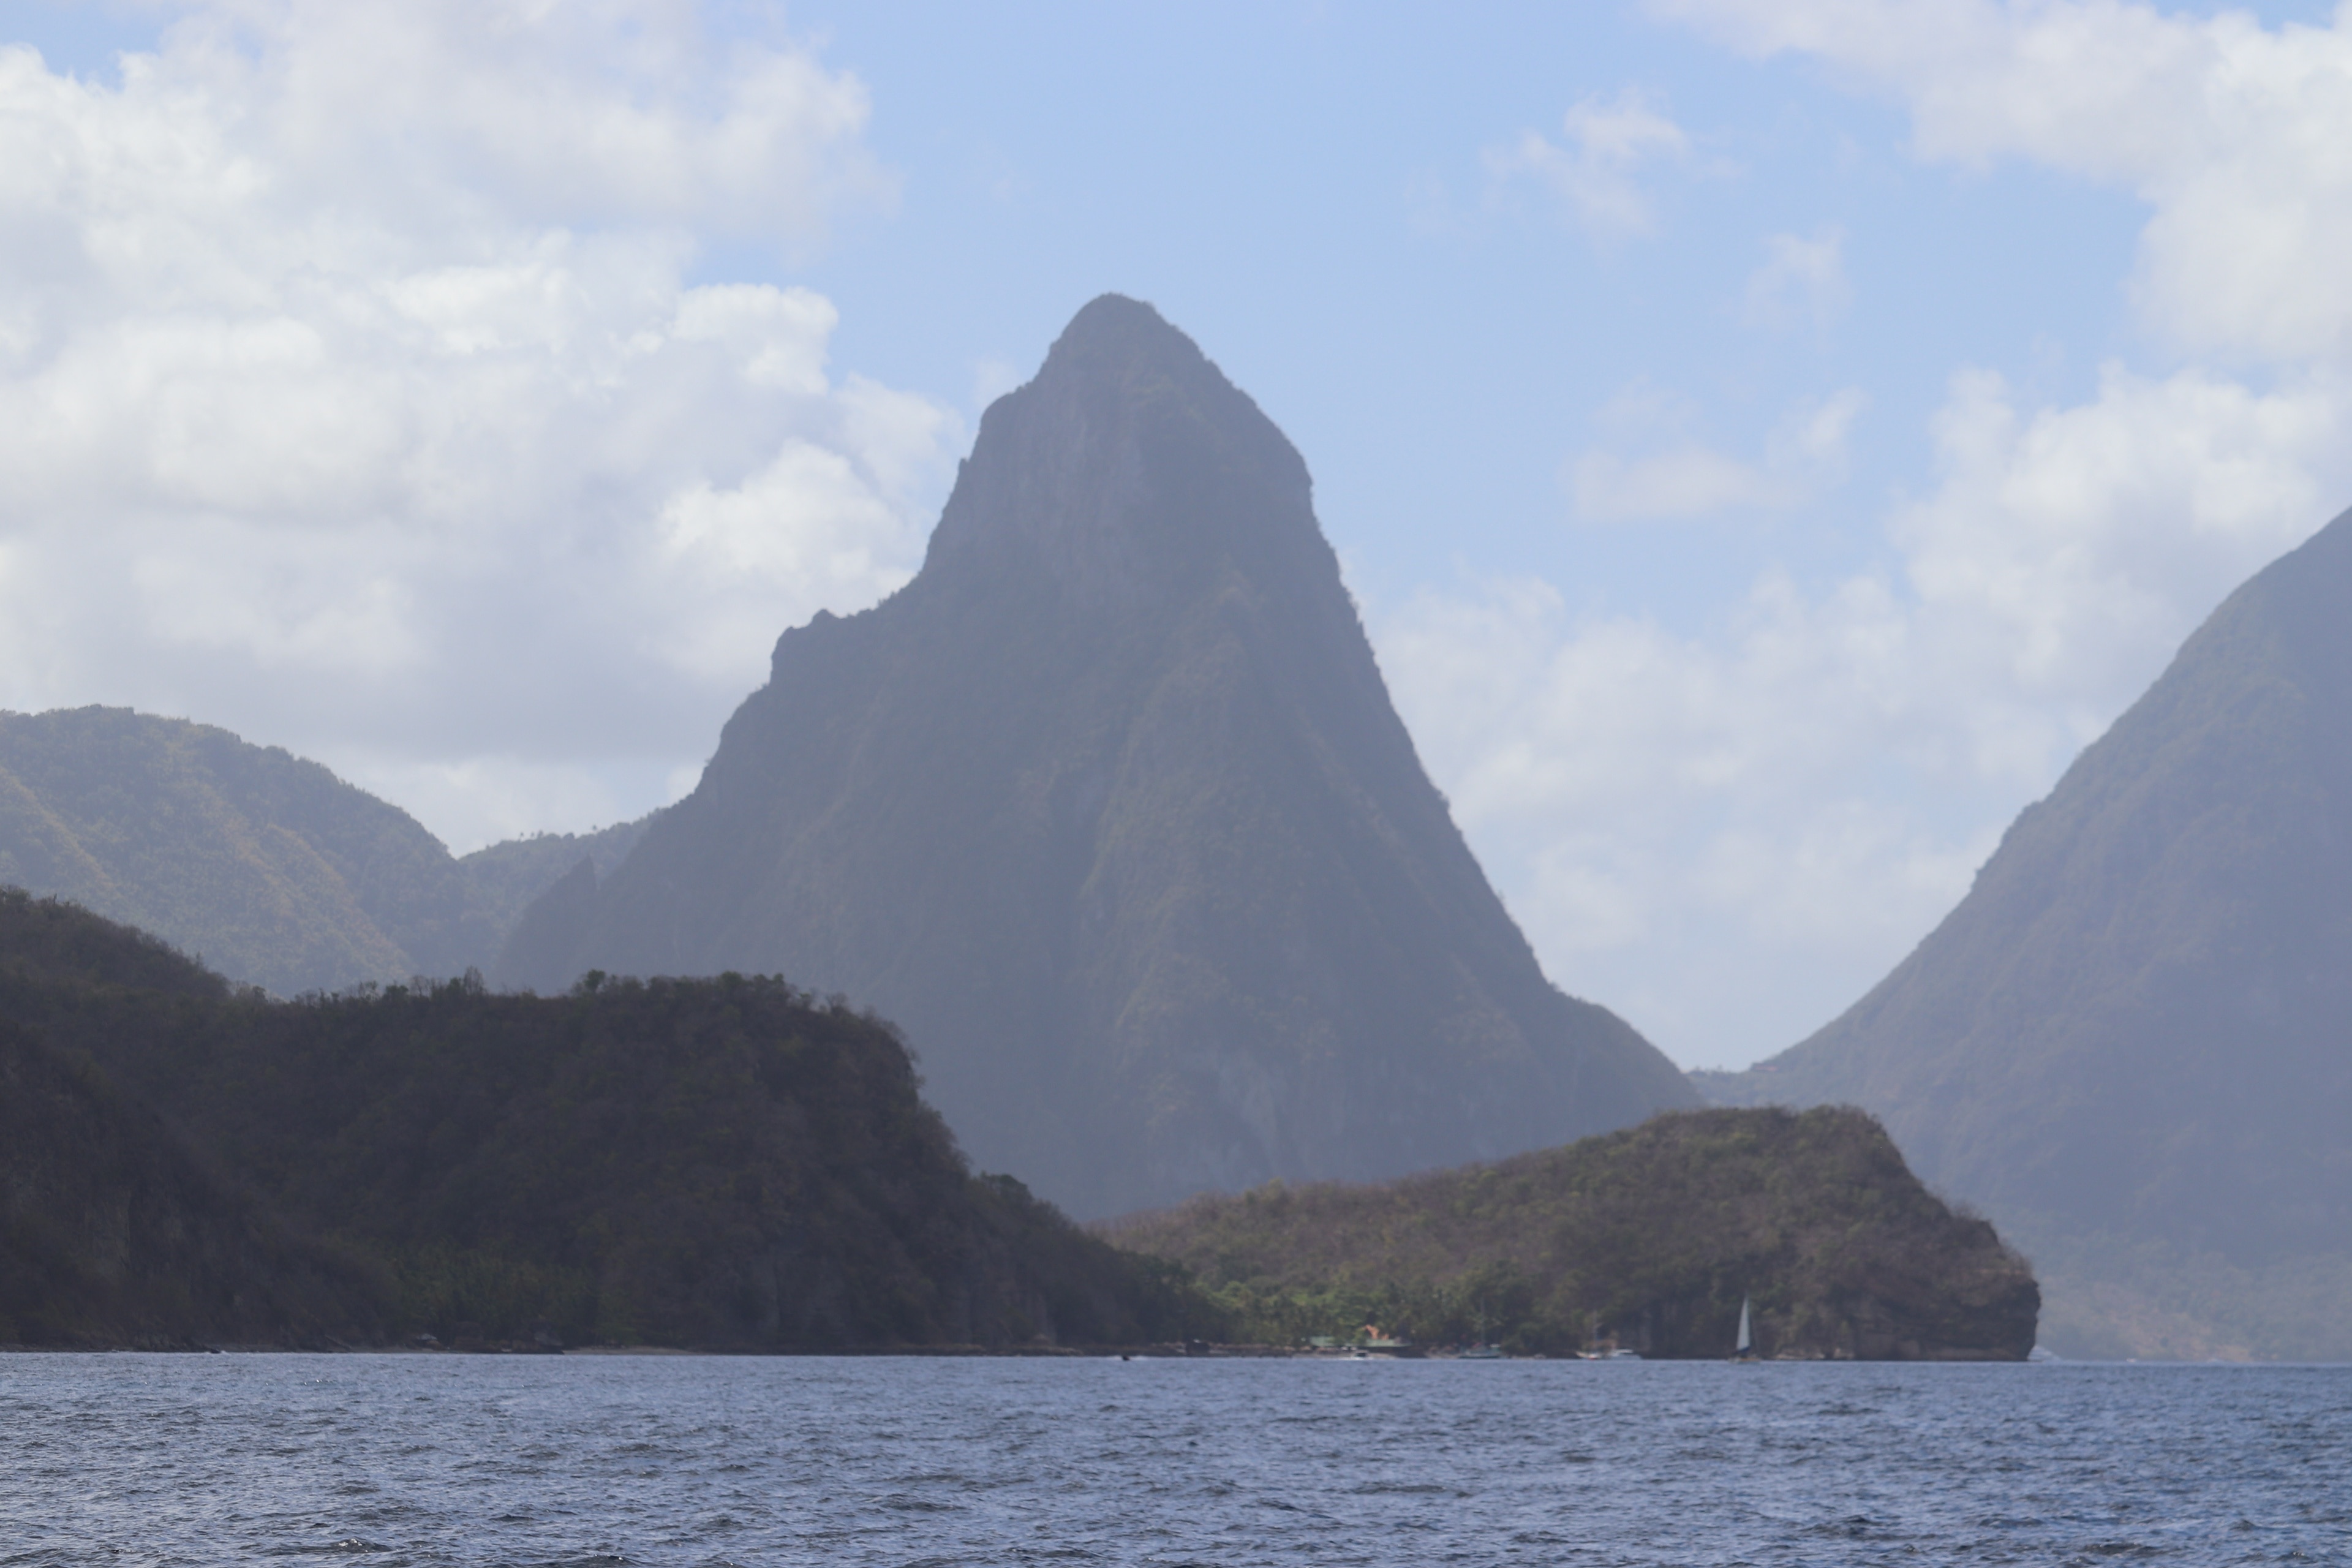 Recently I visited the volcanic island of Saint Lucia and it was truly as wonderful to look at as the people who live there. There is so much to do and see that a week just wasn't enough time. On this excursion I went on a catamaran to The Piton. There is Grand Piton and Petit Piton. Both are 'hikable' but only 1 of the 2 is considered safe to do so. It's about a 3 hr hike to the top for experienced hikers so plan for a full day here. I recommend making it near the end of your trip vs the start or you will spend your vacation very very sore :) At the top you will be greeted with incredible views of the island so bring a camera.
#SaintLucia #WestIndies #Piton #Carribean #IslandLife #Island #Mountain. 